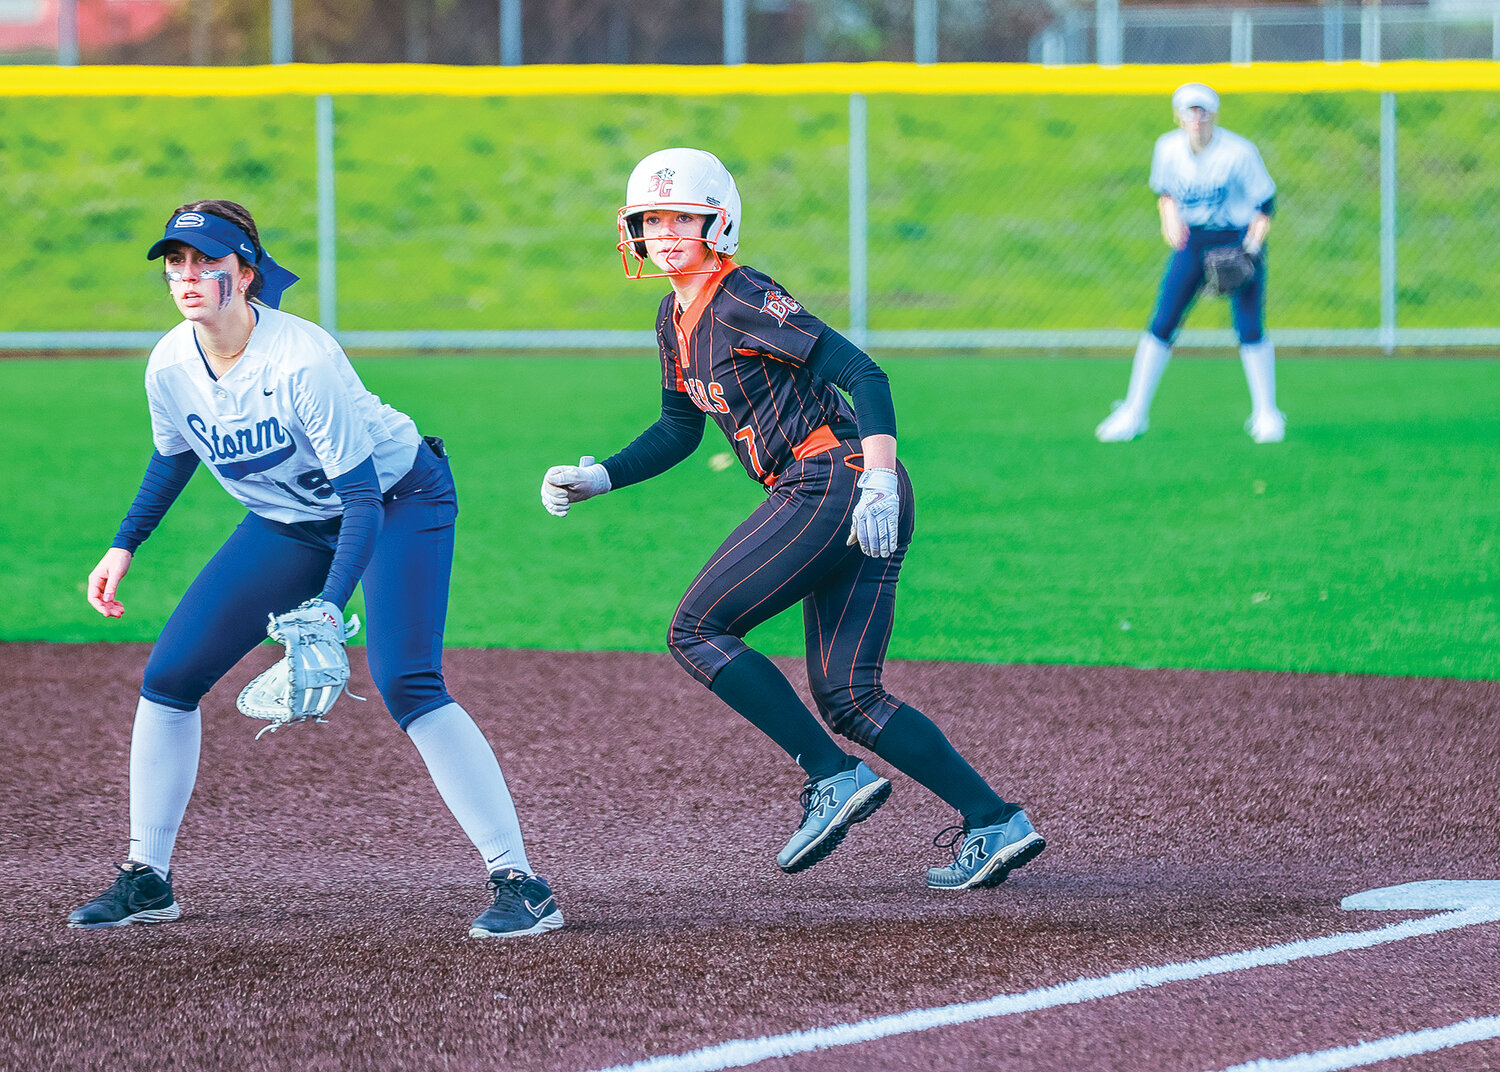 Battle Ground's Hailey Ferguson takes a lead at first base after a basehit during the a game against Skyview at Fort Vancouver High School on Wednesday, April 12.